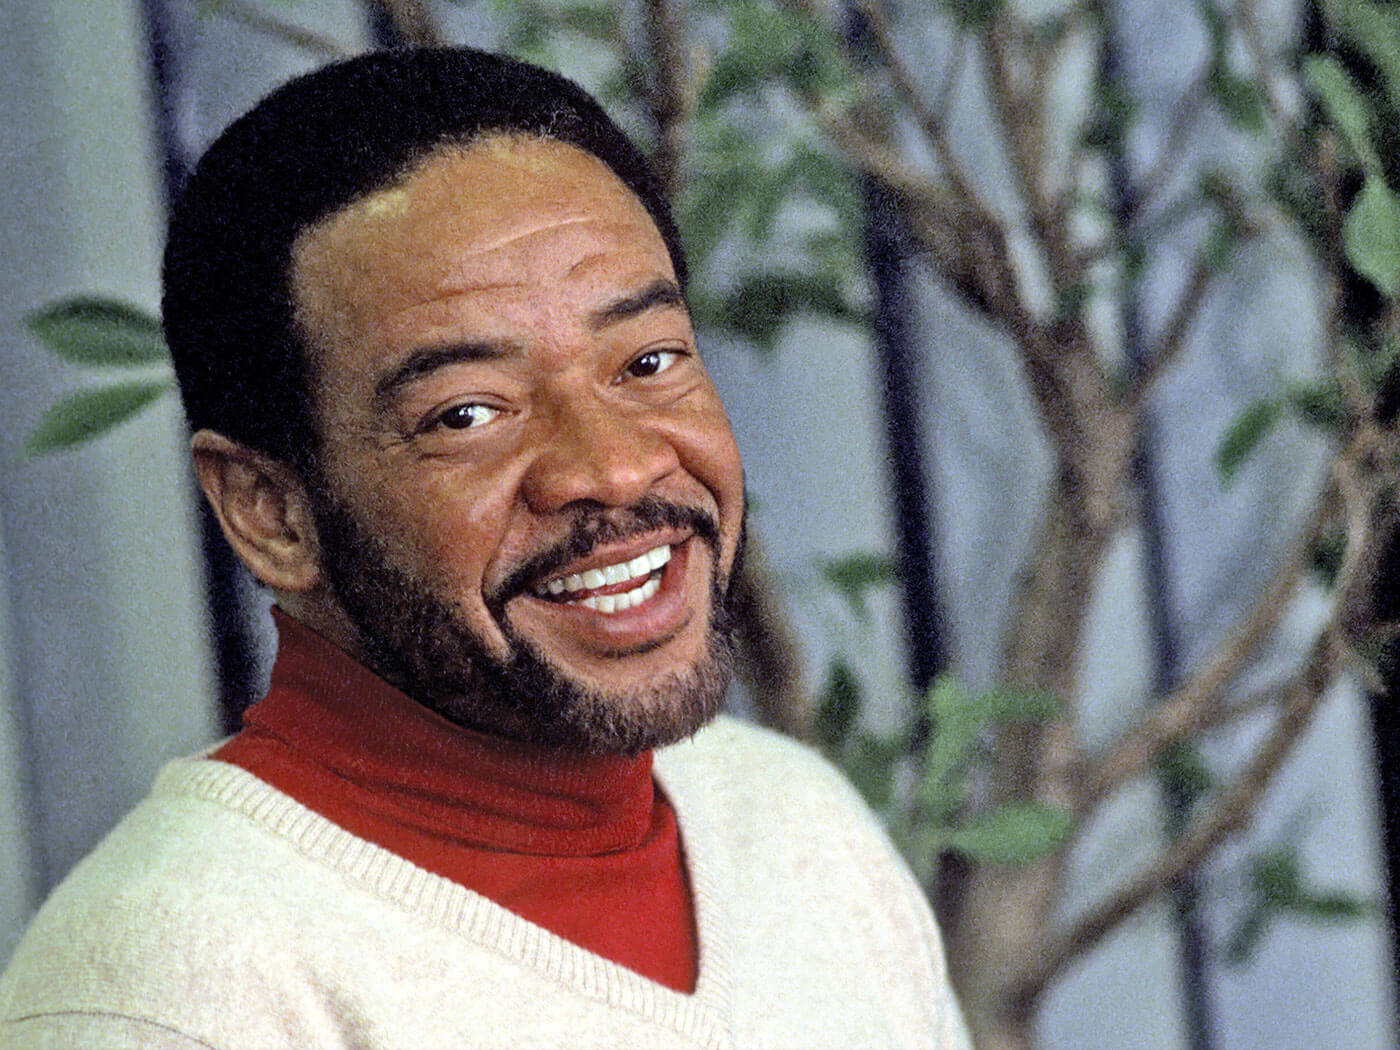 Bill Withers has died aged 81